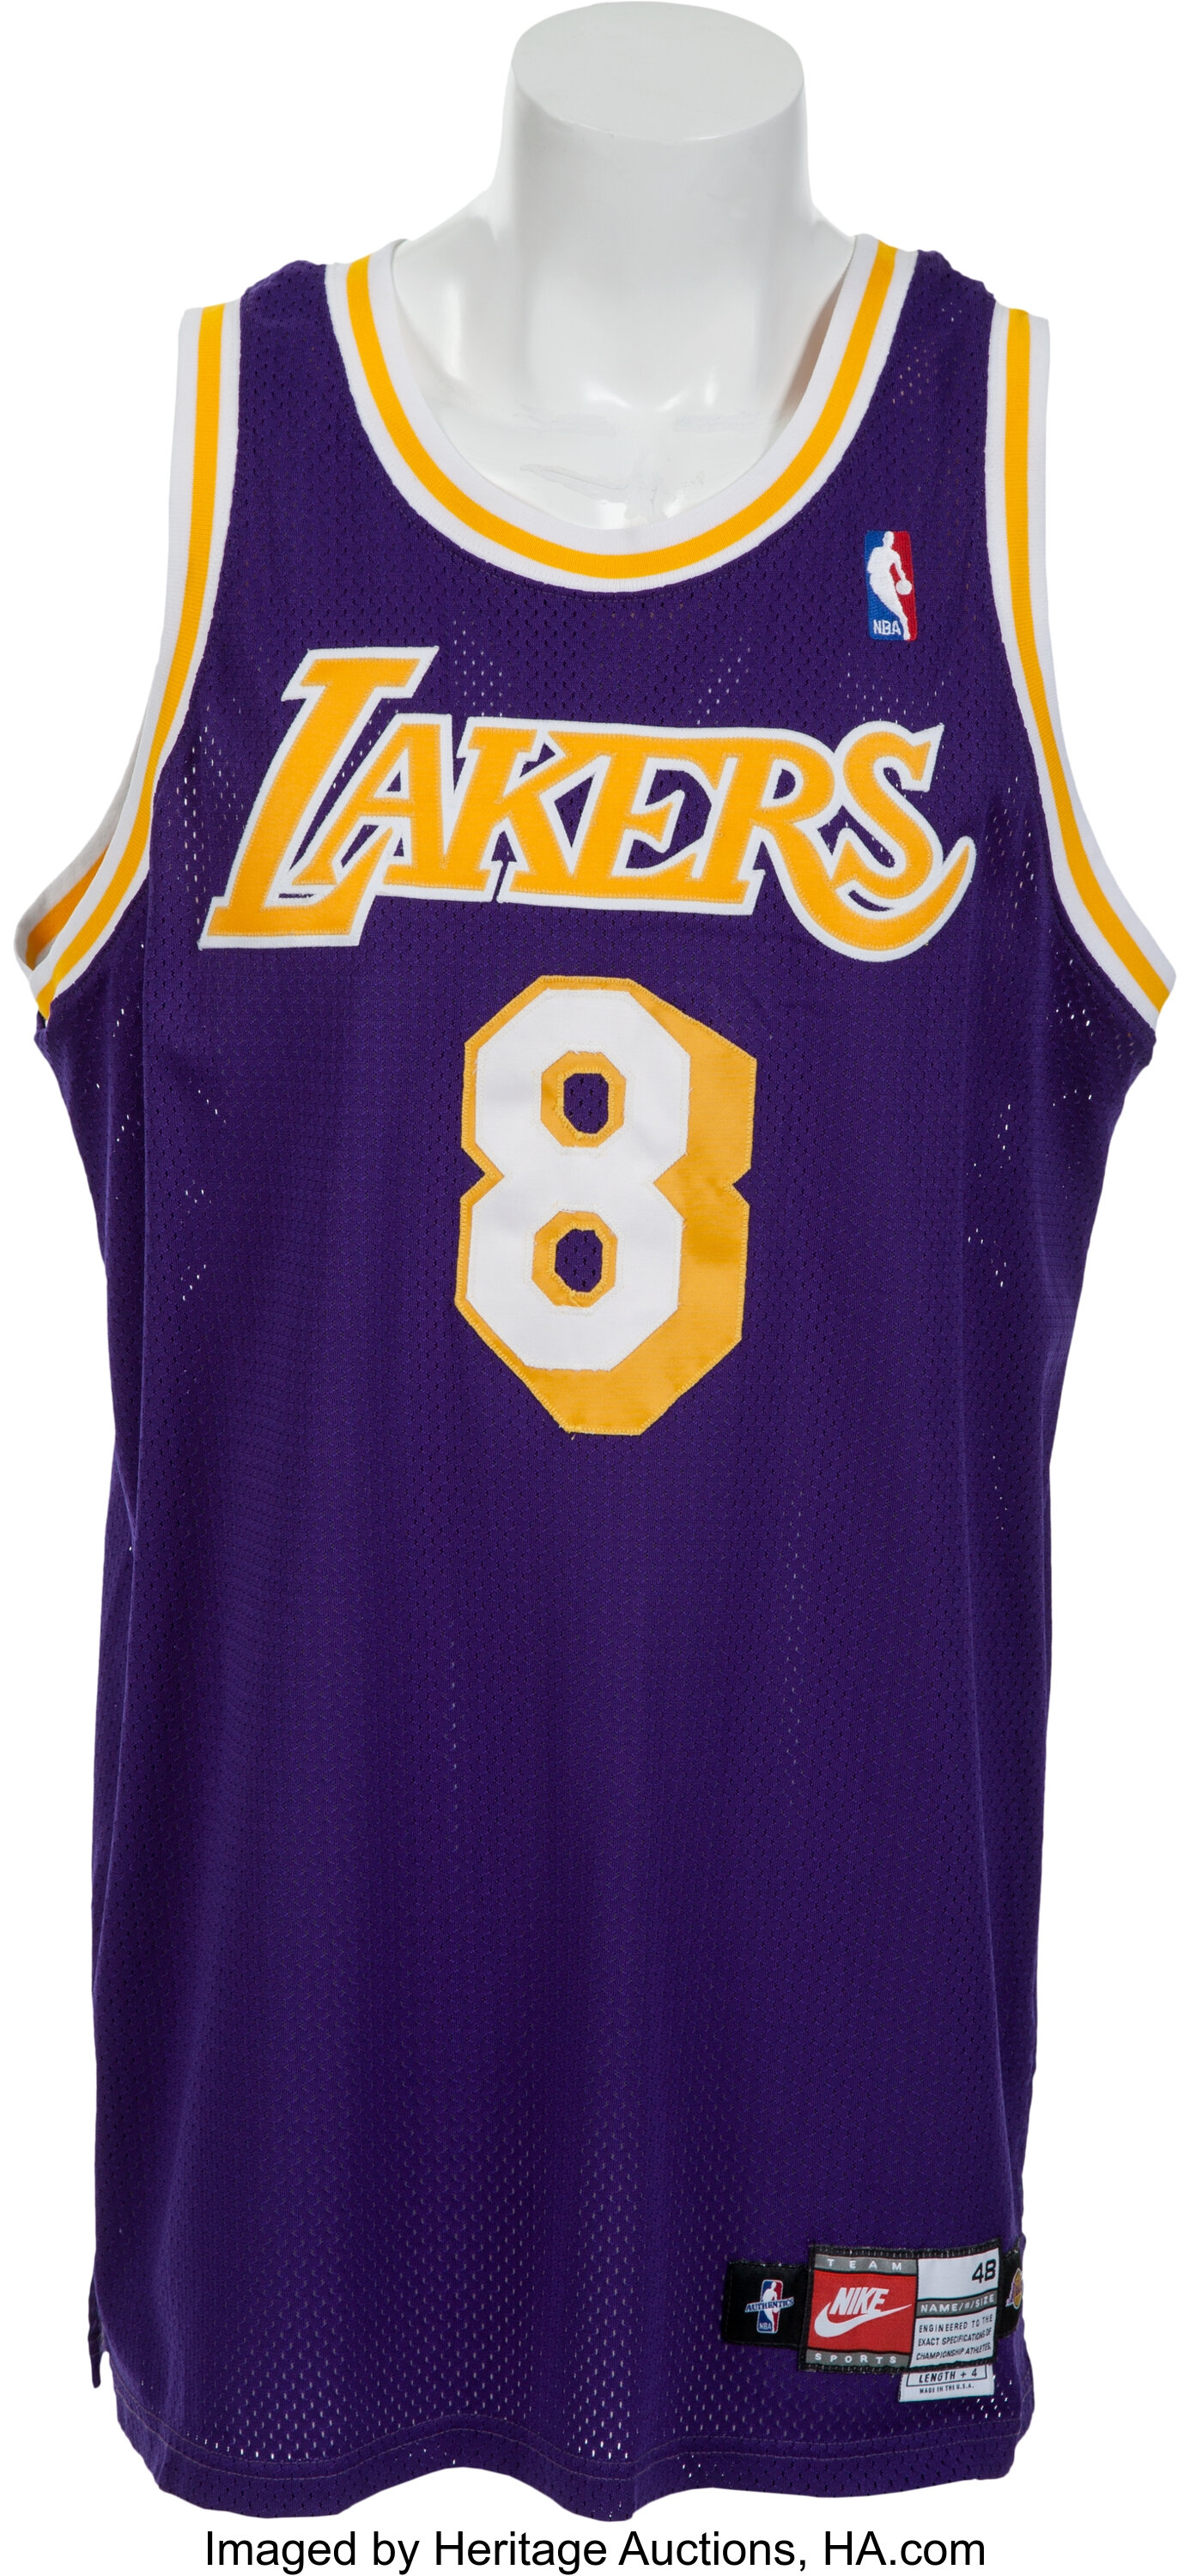 Lakers Size 48 Jersey 